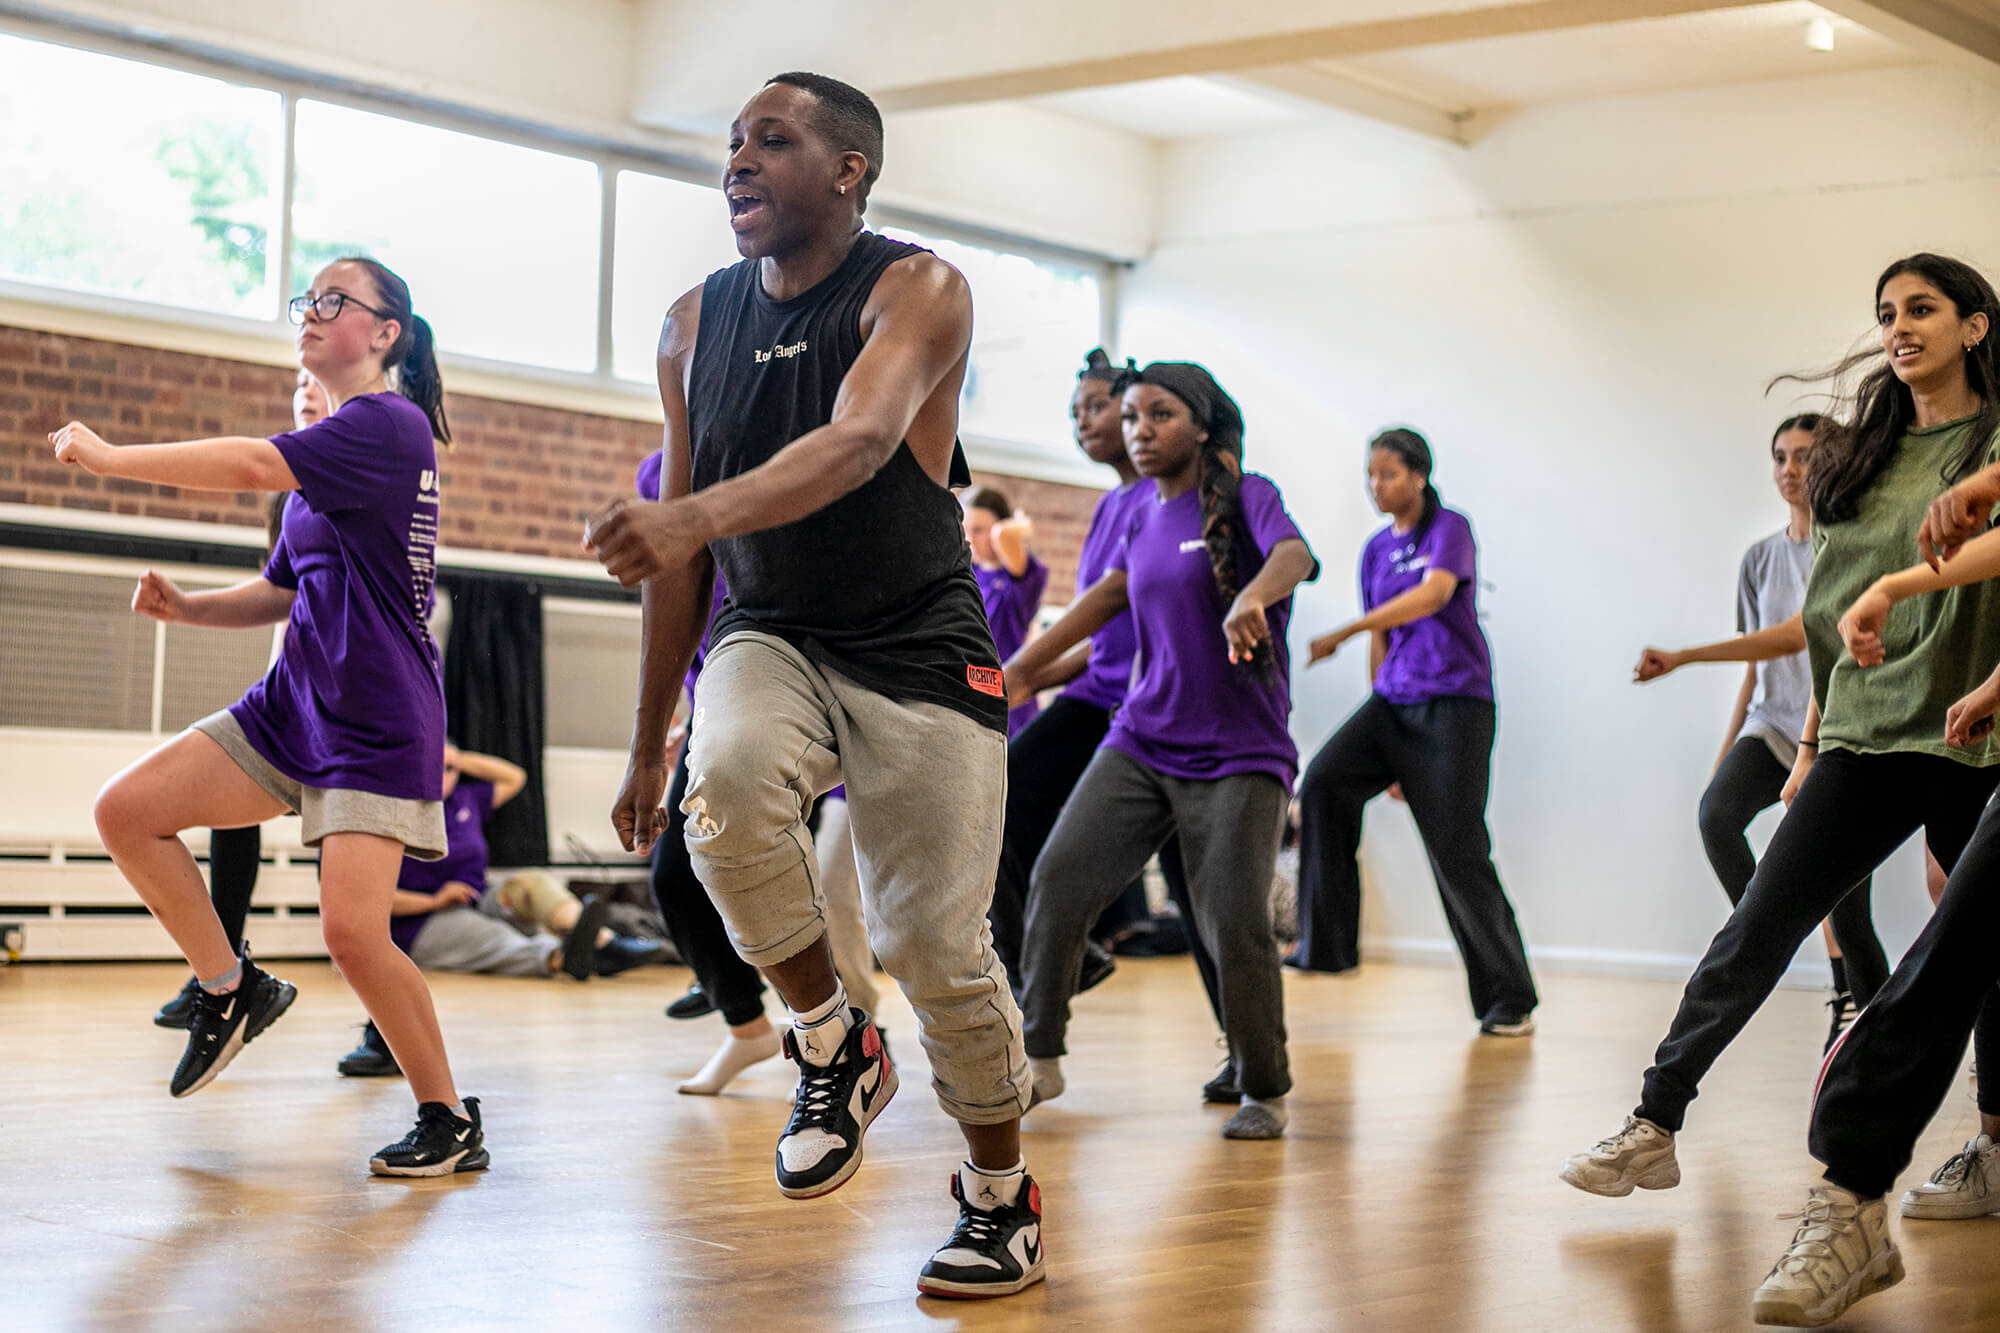 black male dancer  teaching a group of young people to dance. all in a running man position wearing athletic clothing in a dance studio. 